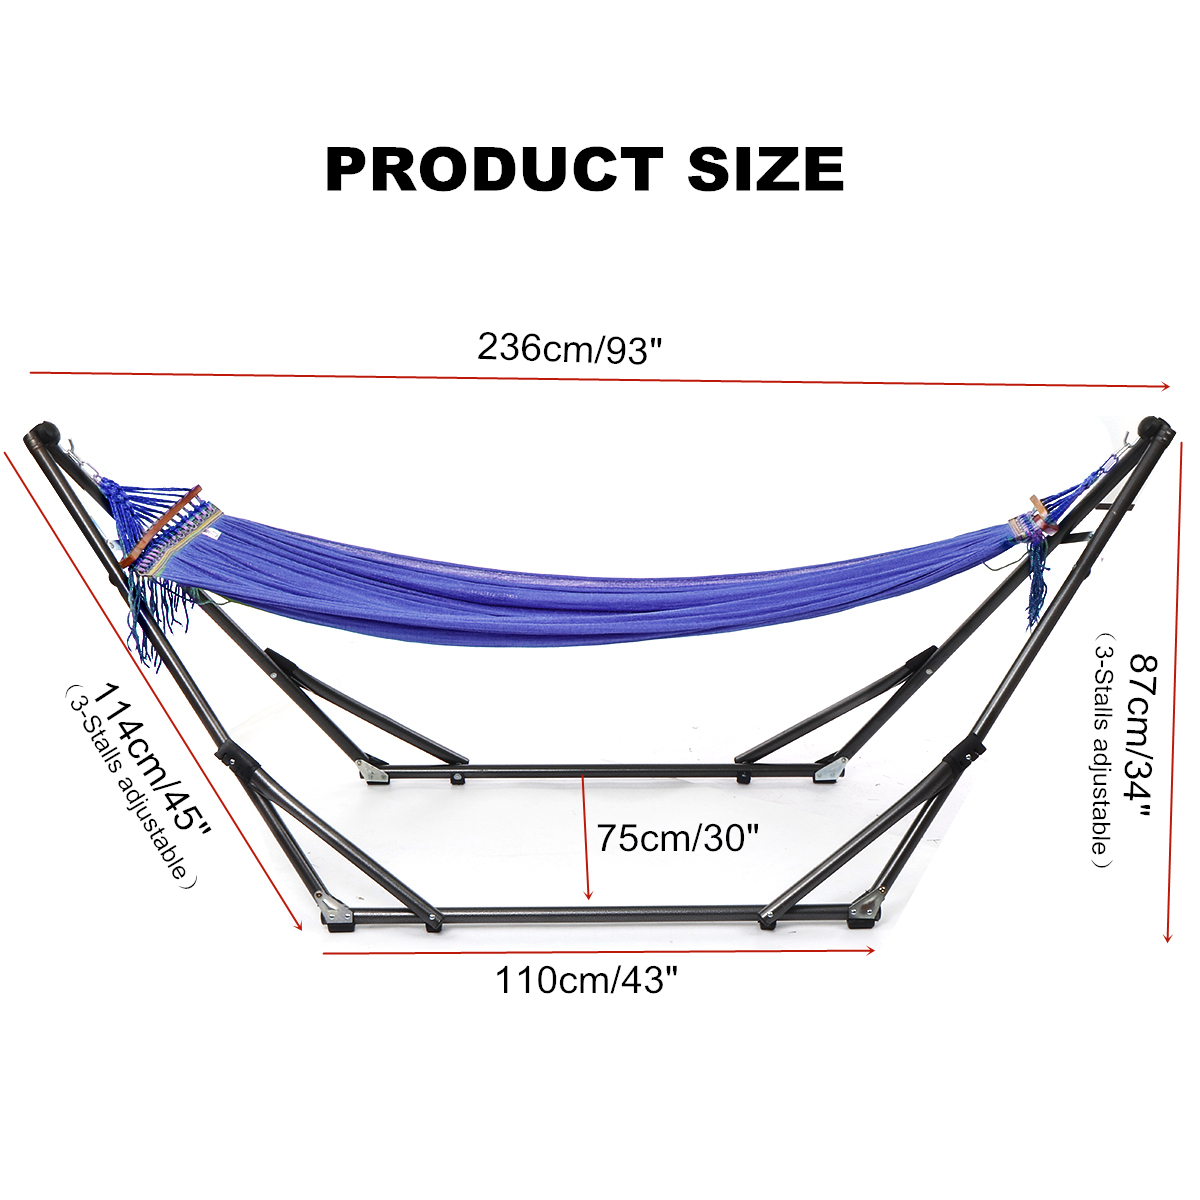 Portable Canvas Hammock Stand Portable Multifunctional Practical Outdoor Garden Swing Hammock Single Hanging Chair Bed Leisure Camping Travel 7